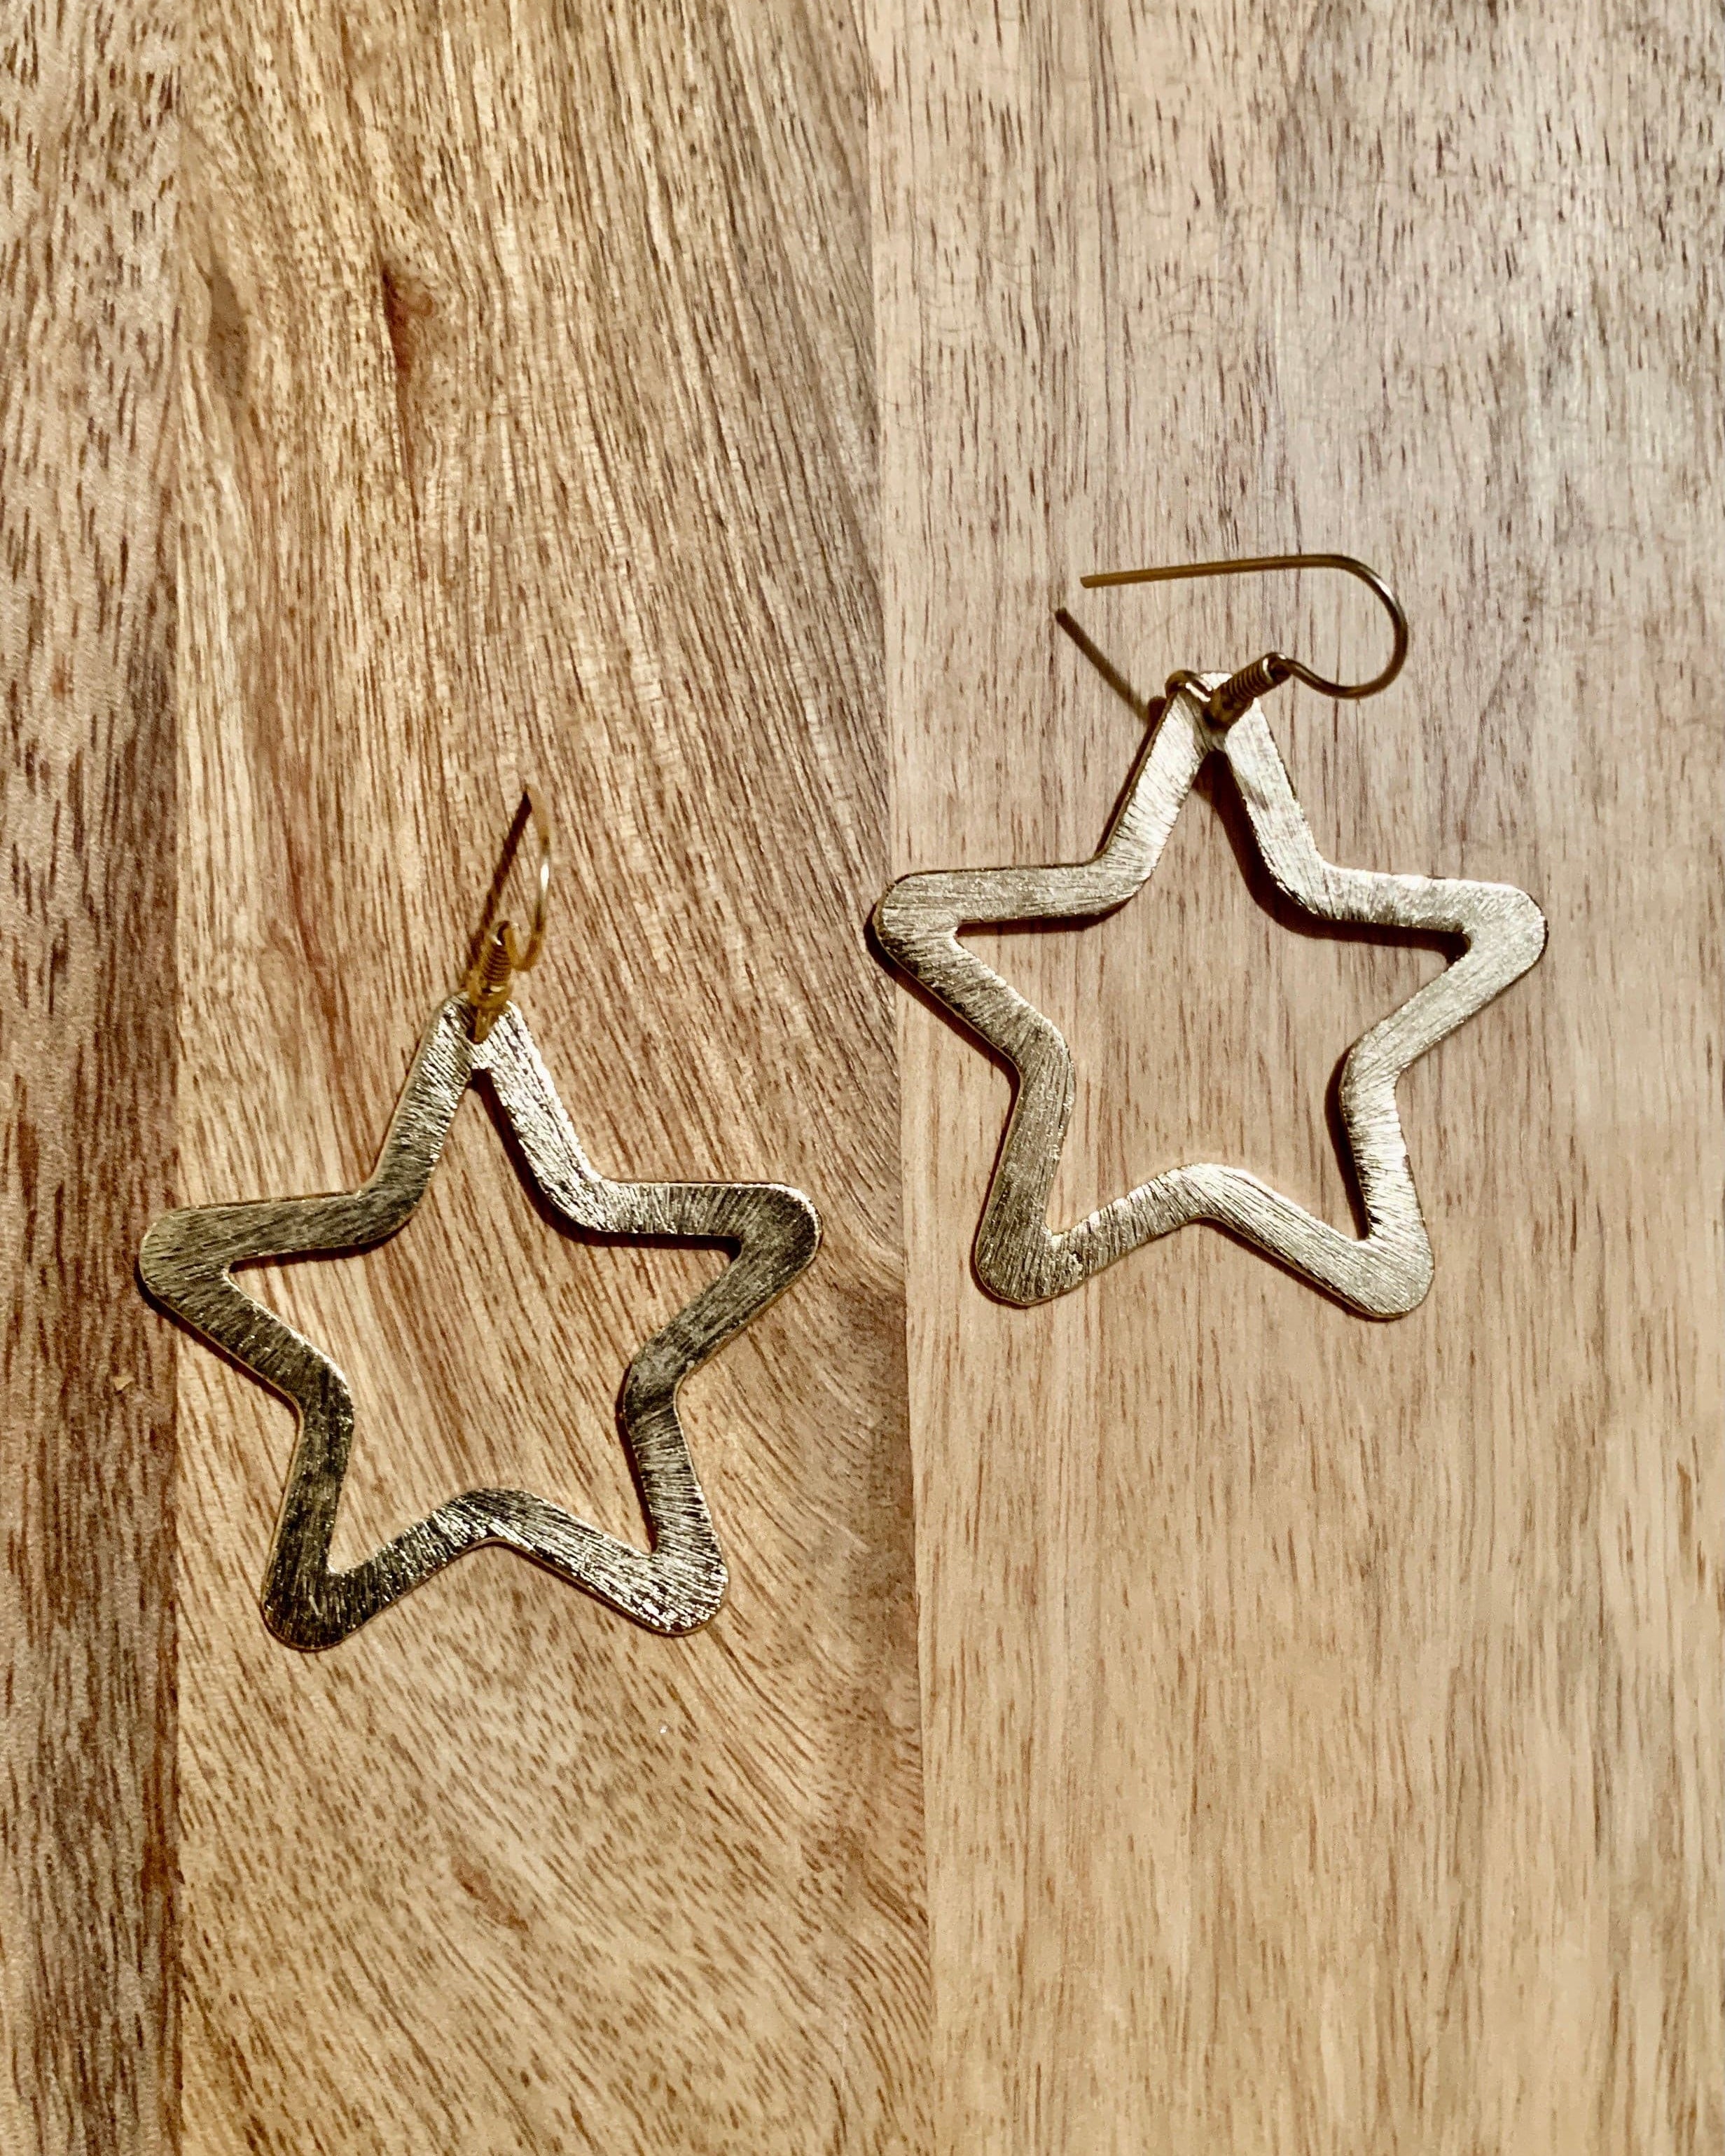 Large Brushed Gold Star Earrings.